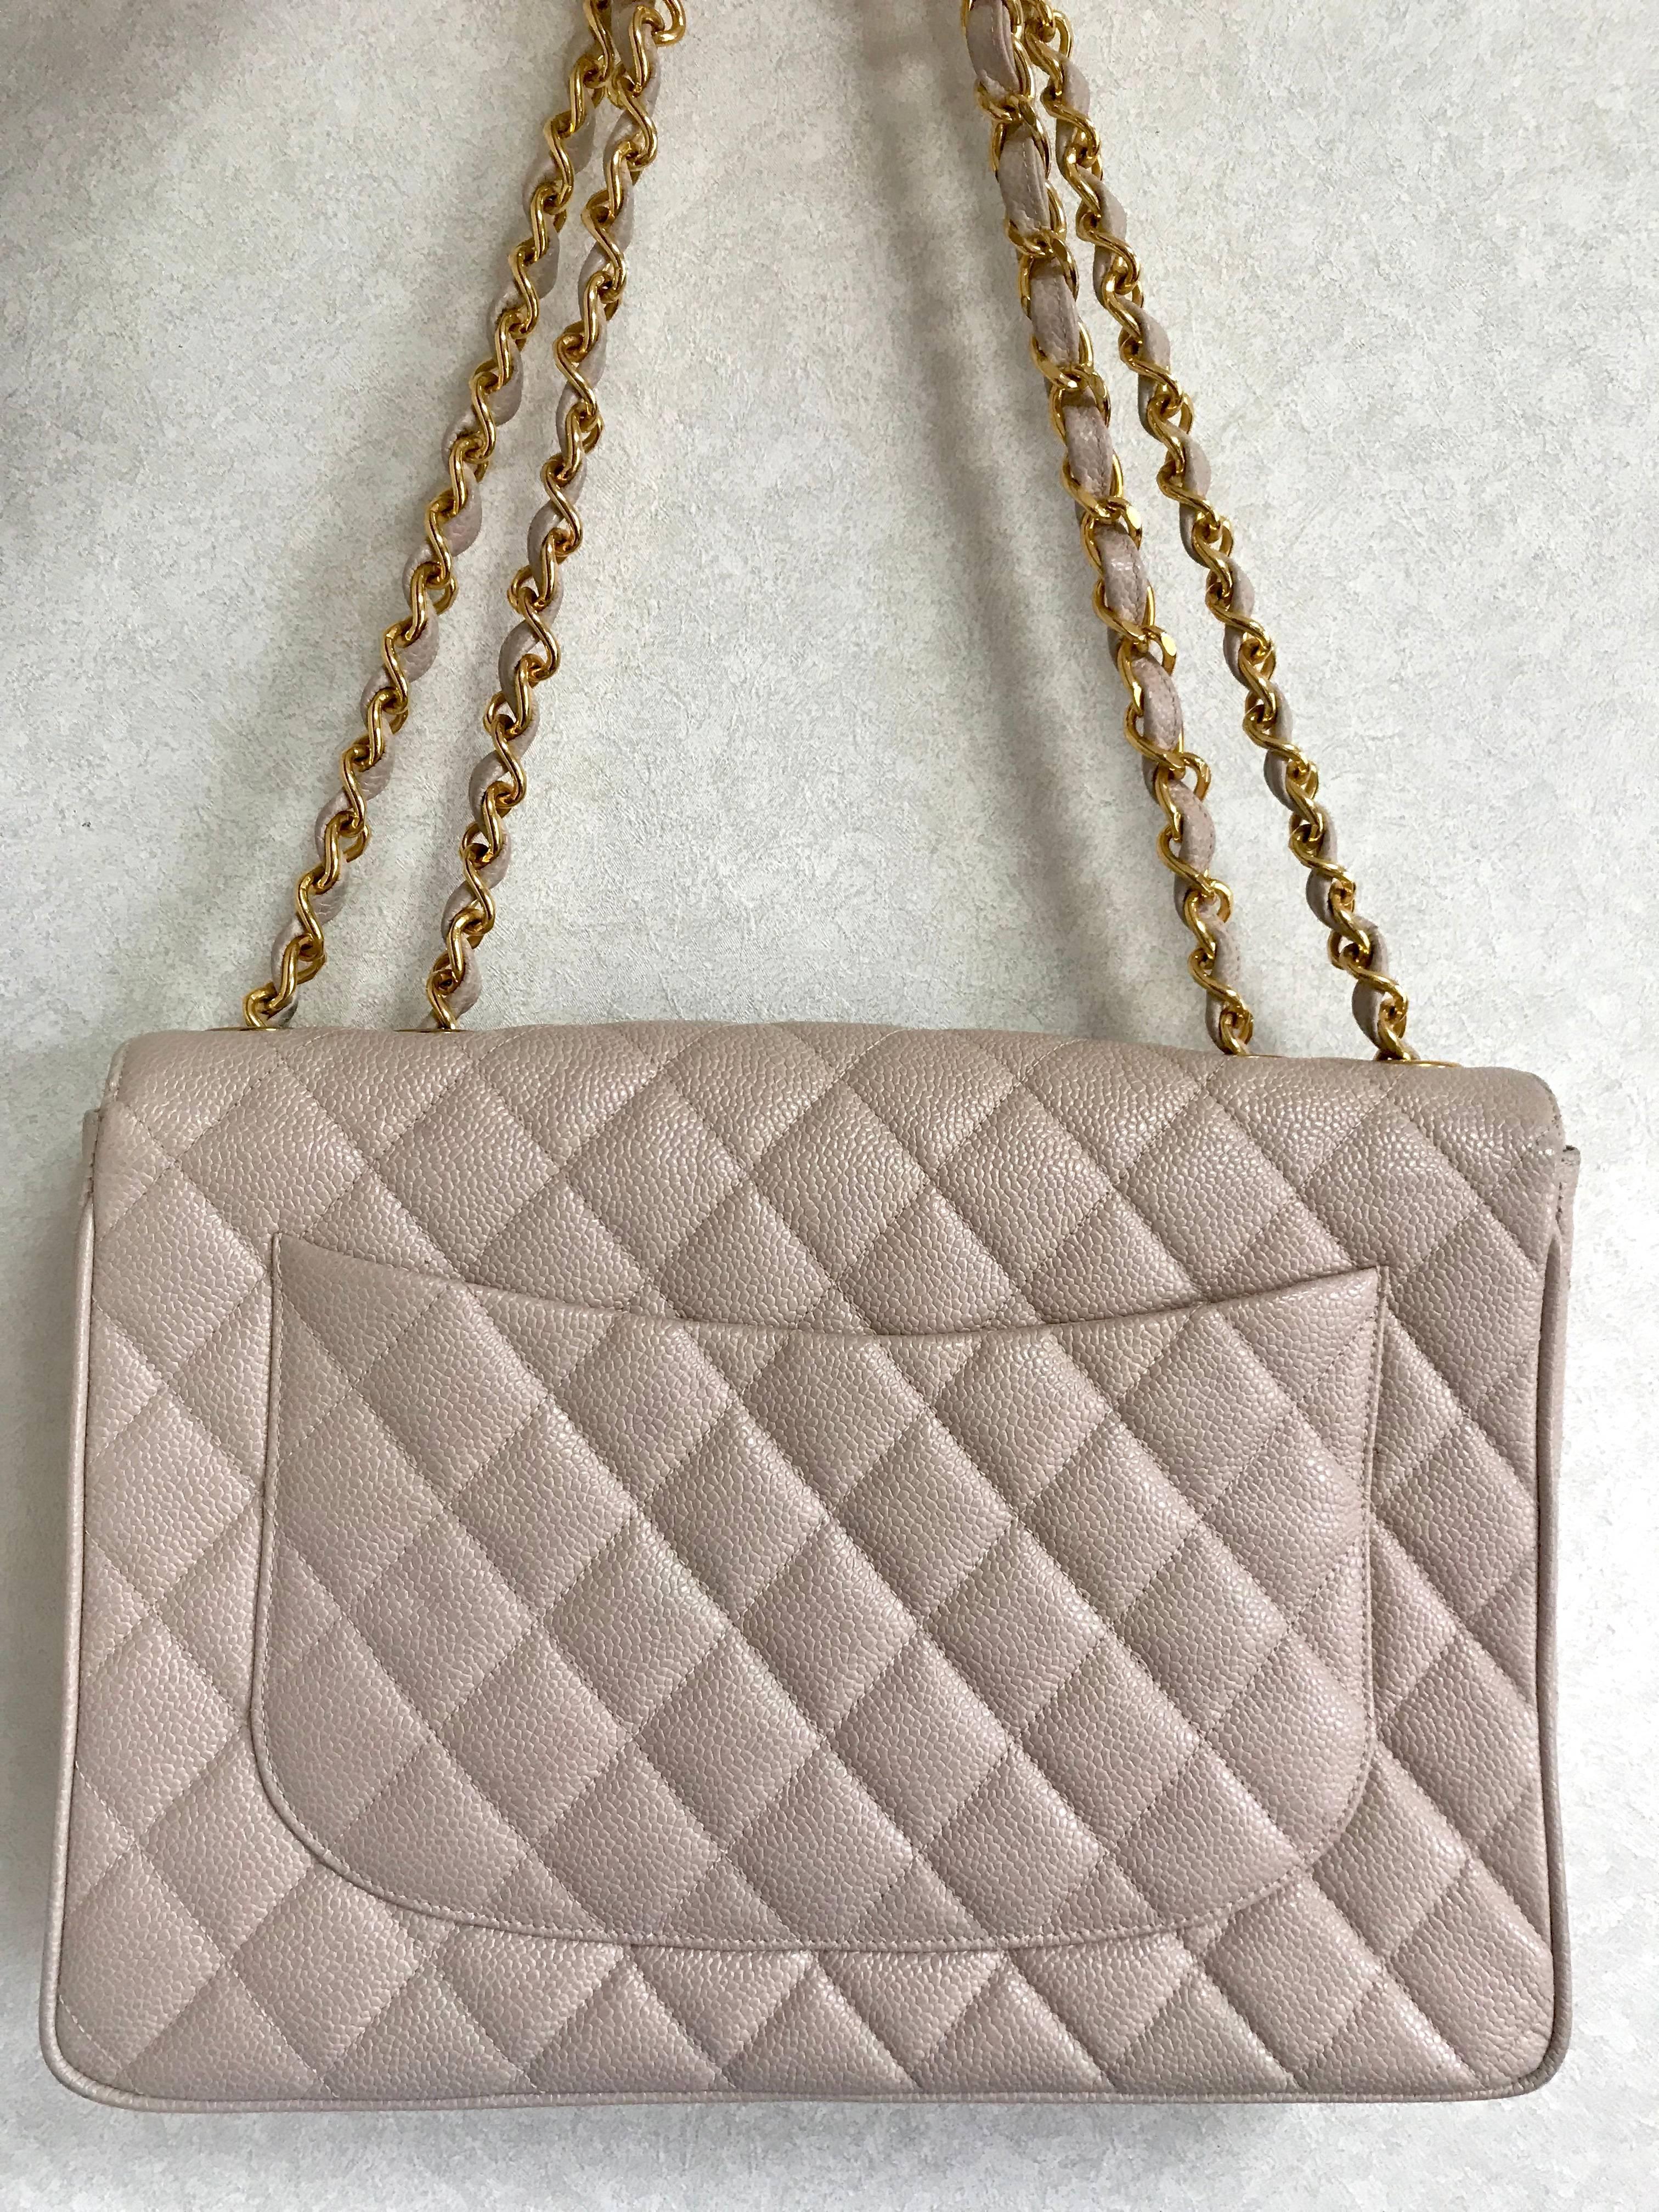 MINT. 1990s. Vintage CHANEL beige jumbo/large 2.55 caviar leather shoulder bag with golden CC motif. Classic purse. Rare color.

Introducing one of the most popular and classic masterpiece bags from CHANEL back in the 90's, a jumbo/large size double